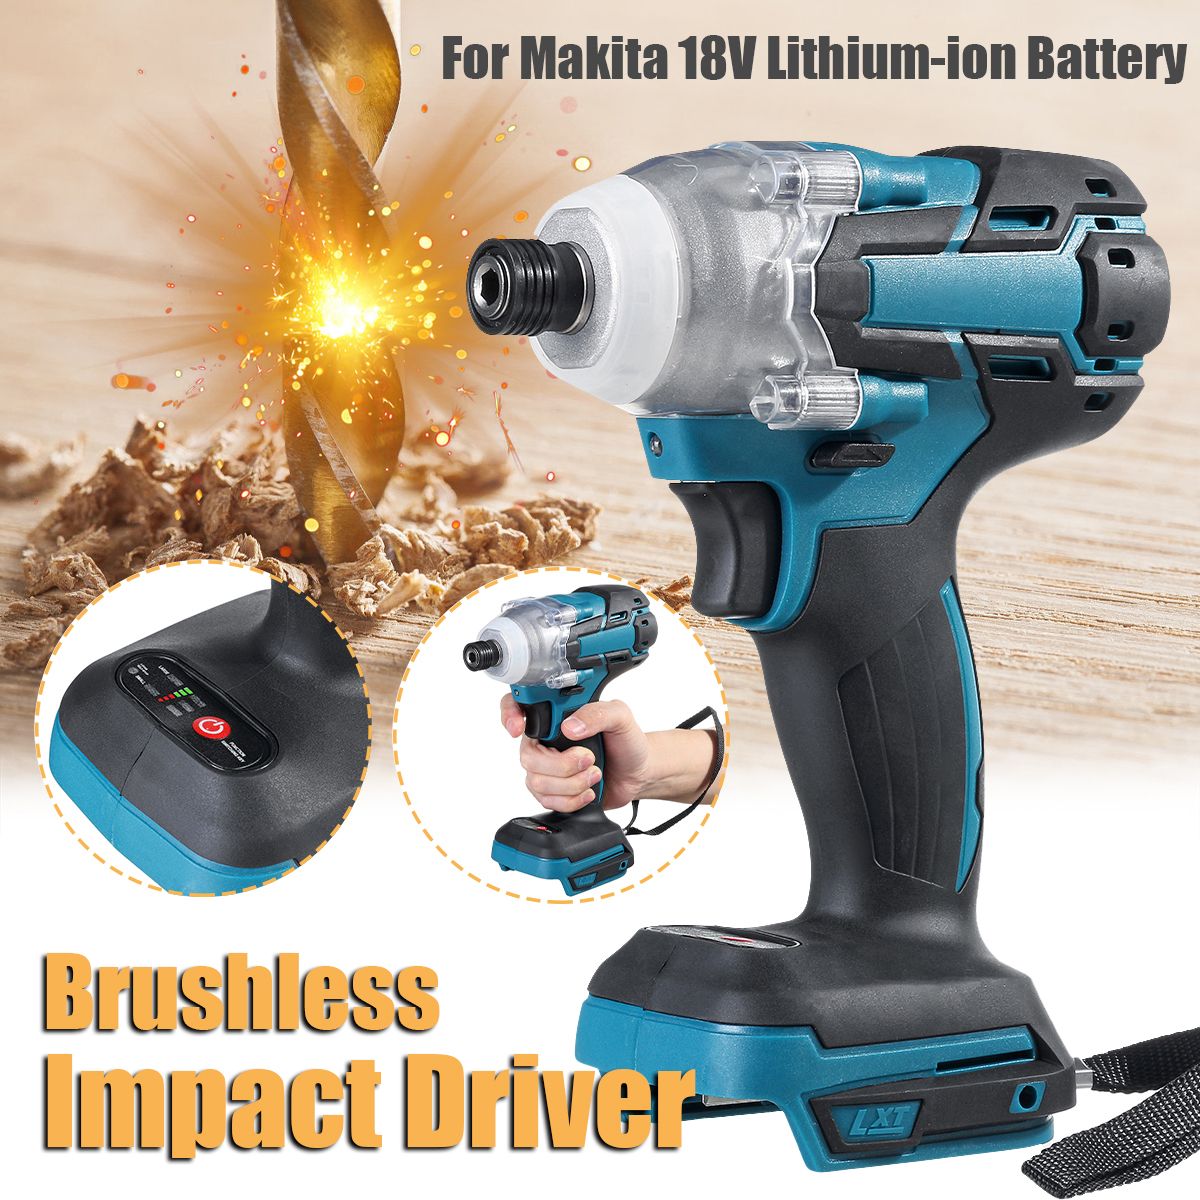 18V-520Nm-Cordless-Brushless-Impact-Drill-Driver-Electric-Screwdriver-Drill-Stepless-Speed-Change-Sw-1640978